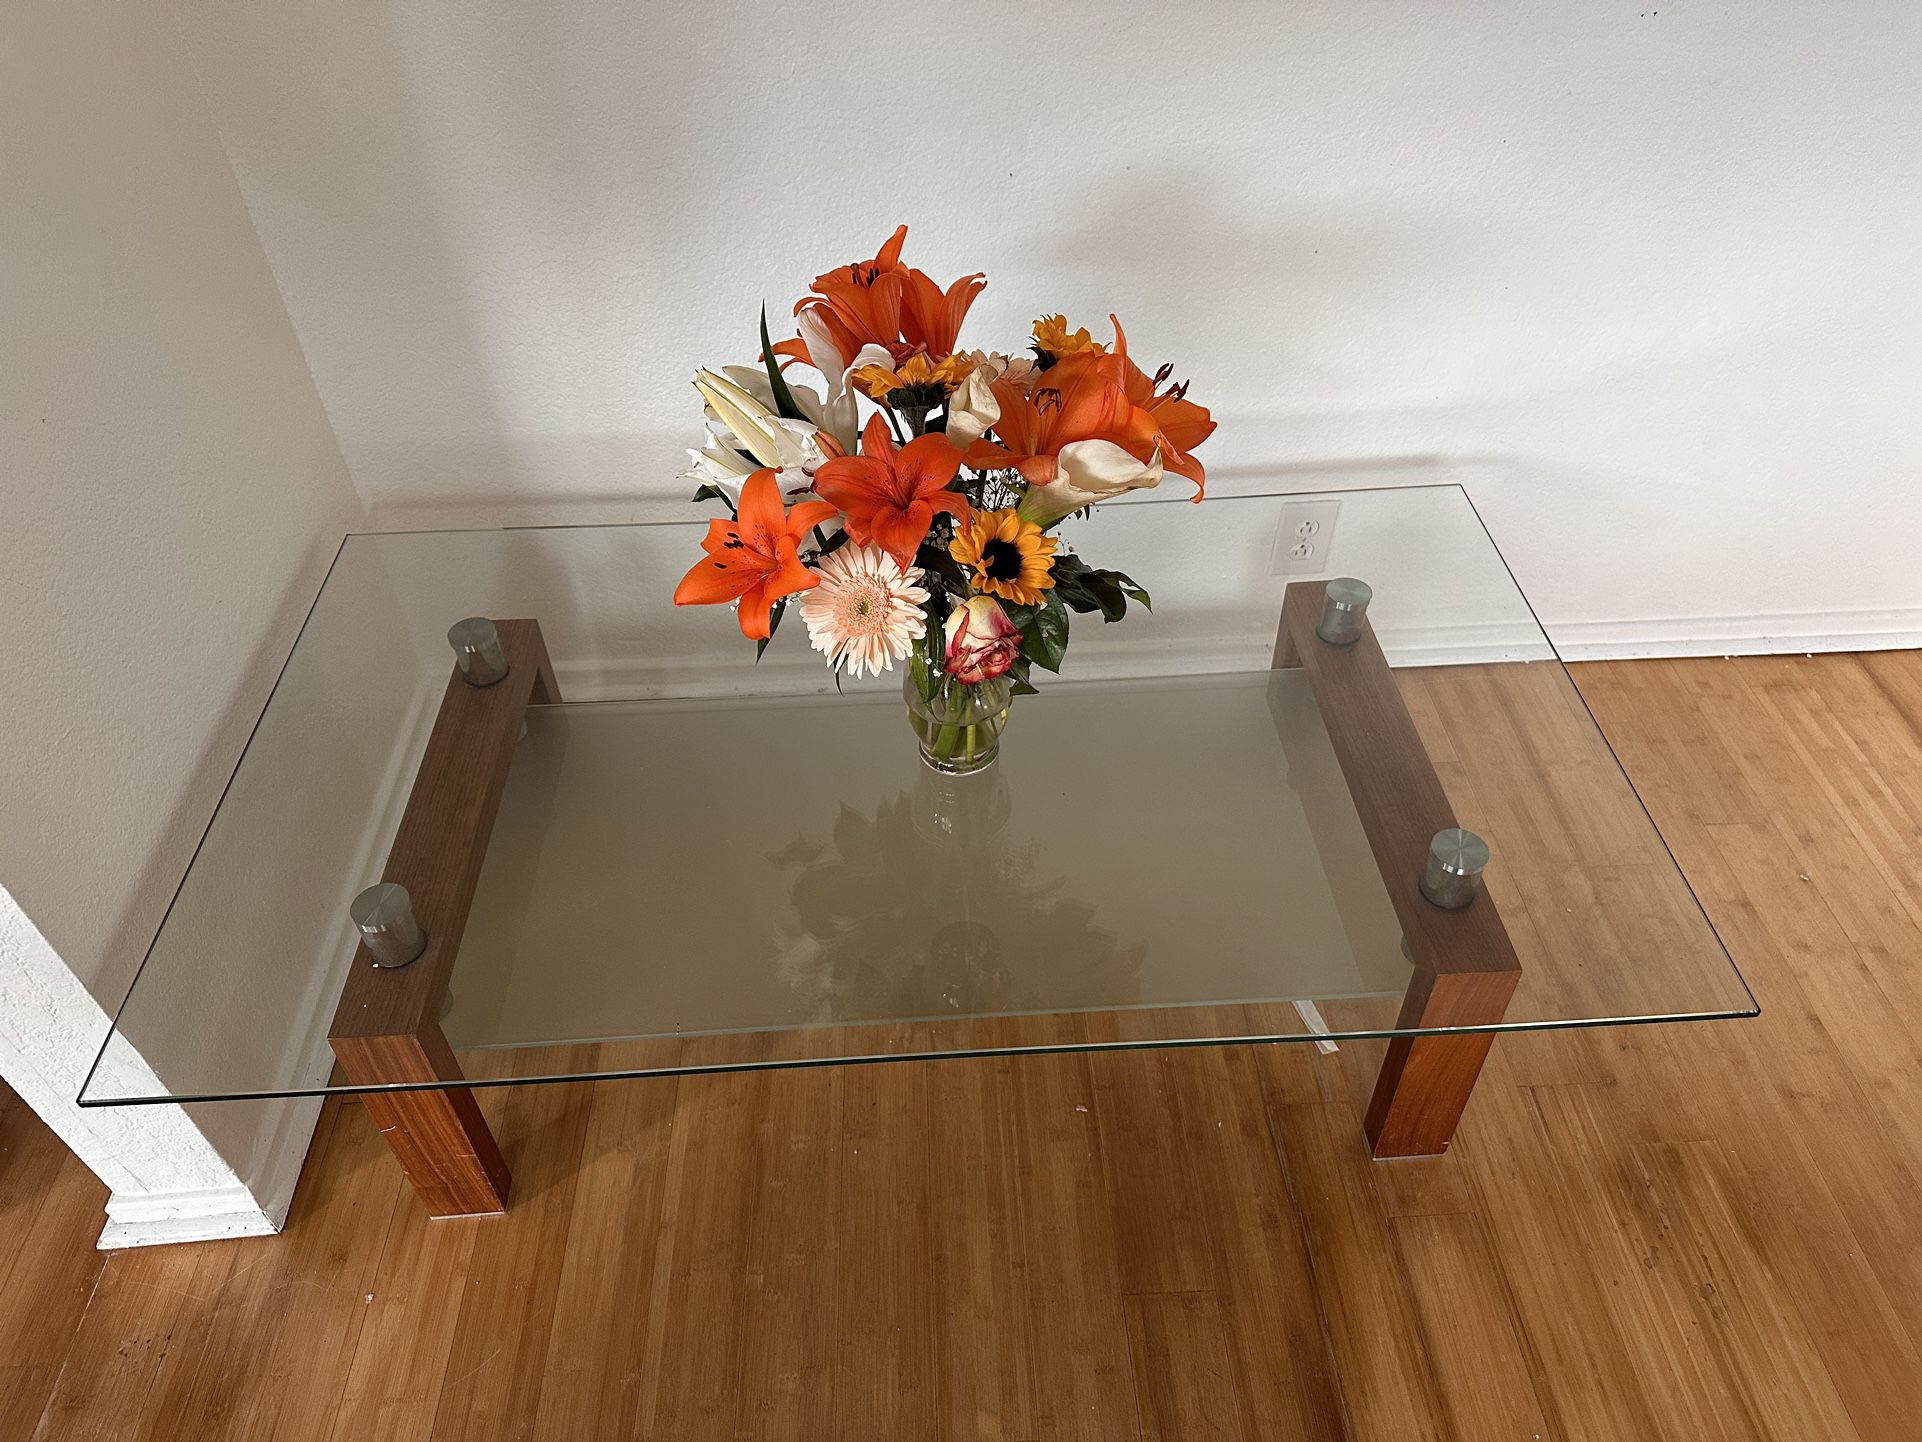 Architectural Coffee table $100